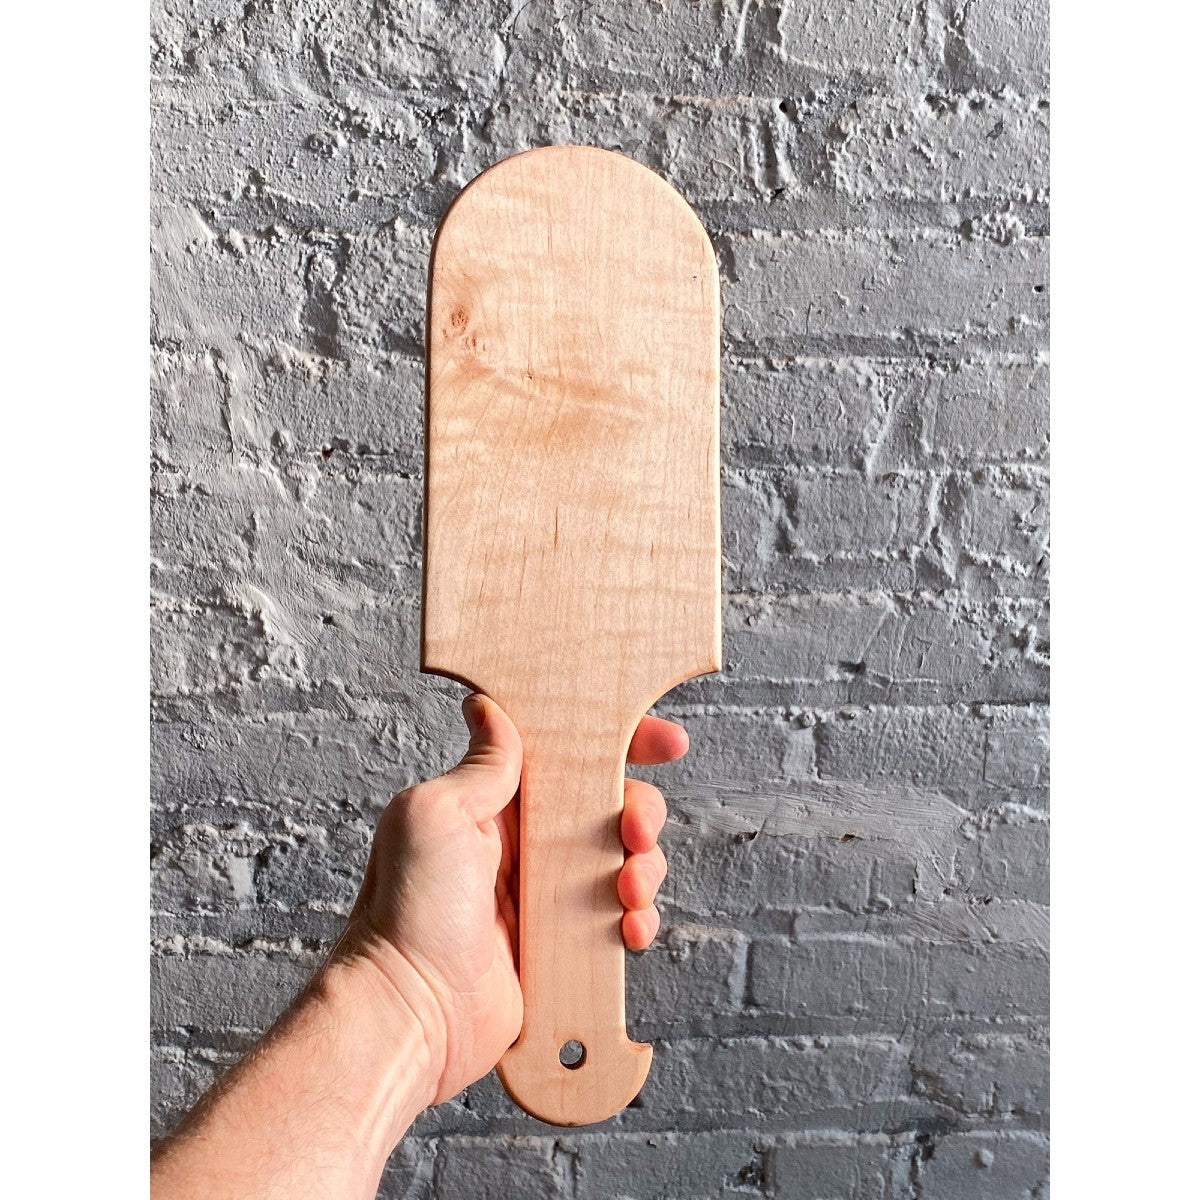 Handcrafted Wooden Paddle with Holes for BDSM and Spanking Fetish